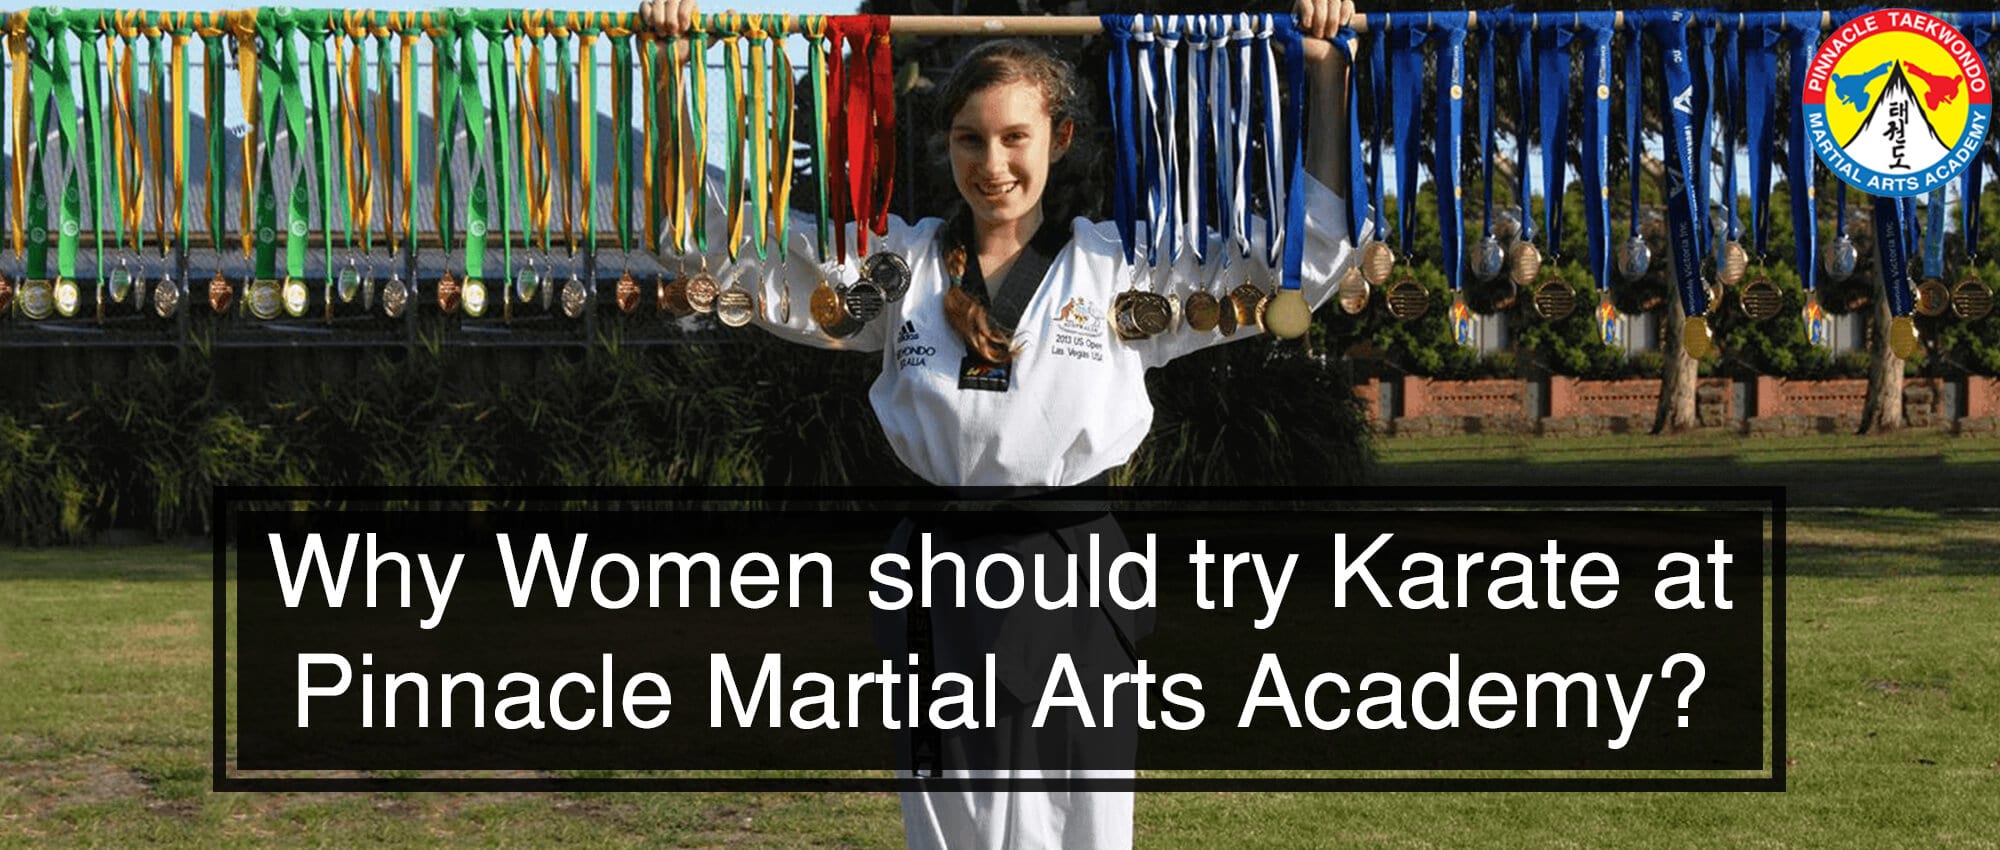 Why Women should try Karate at Pinnacle Martial Arts Academy